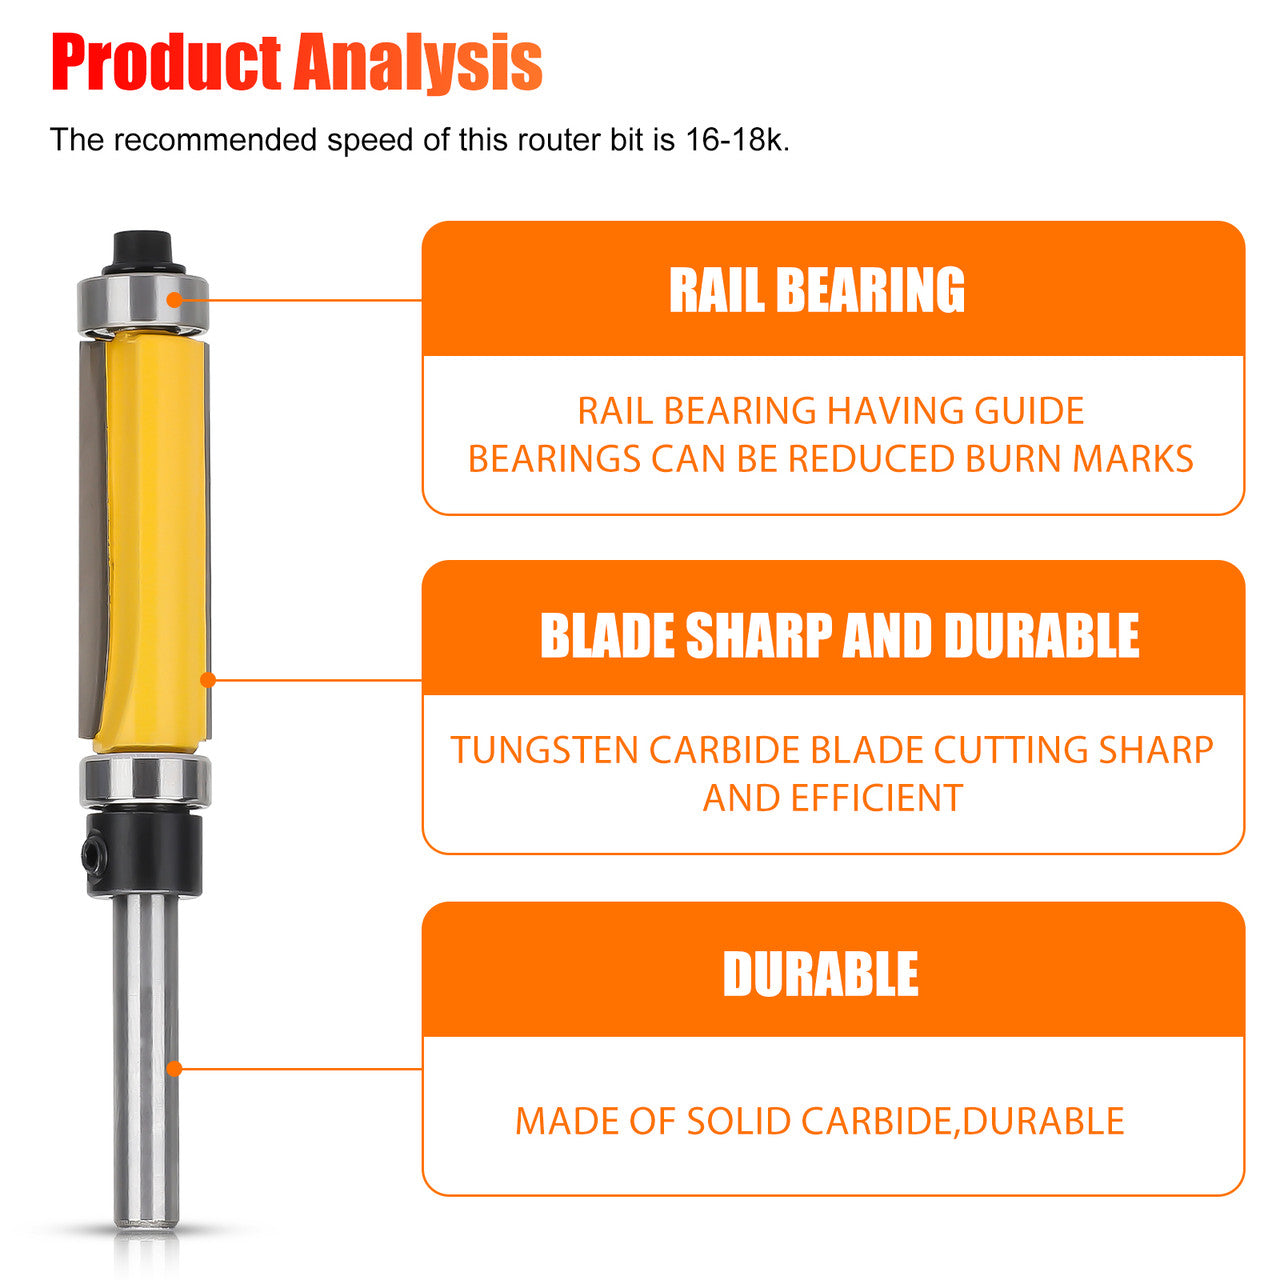 Bearing Router Bit with Grade C3 Mircro Grain Carbide Blades, Perfect fo Woodworking Edging and More